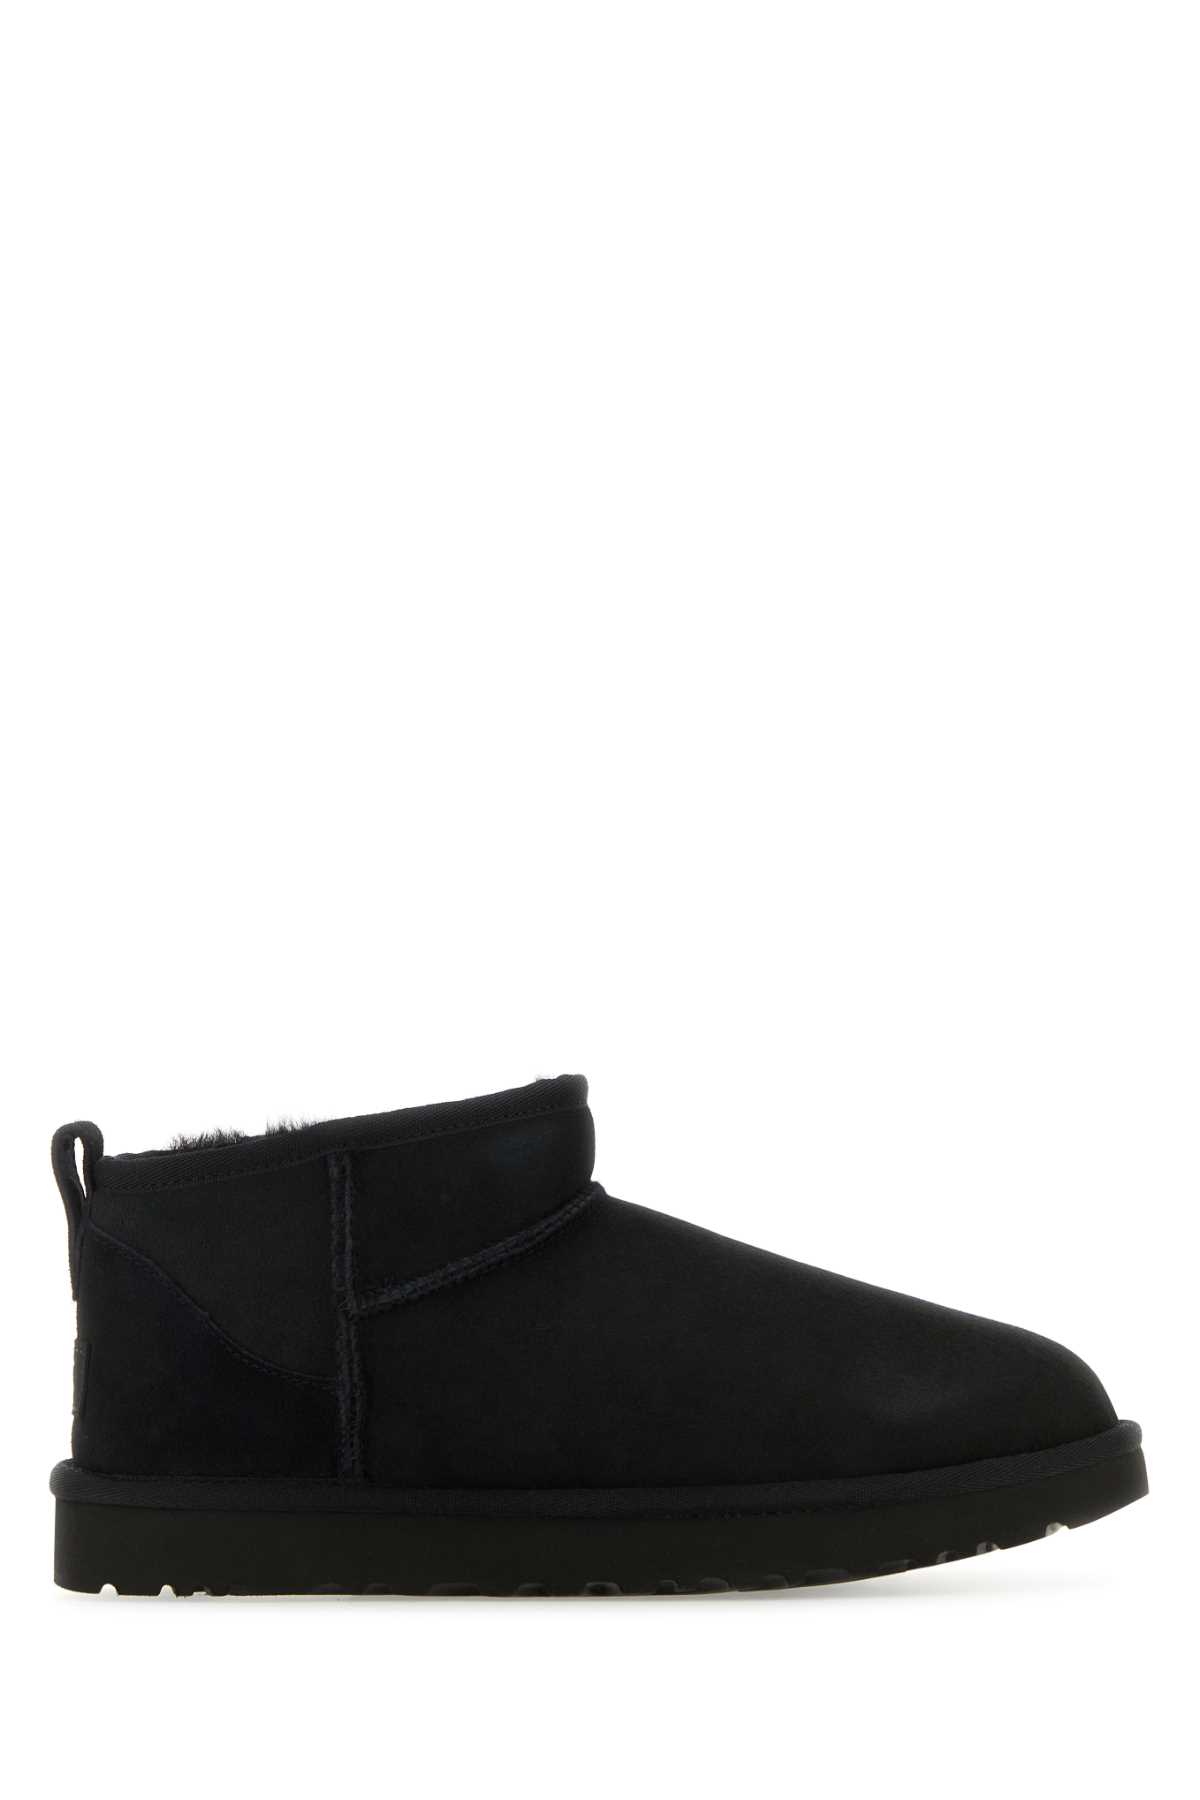 Black Suede Classic Ultra Mini Ankle Boots